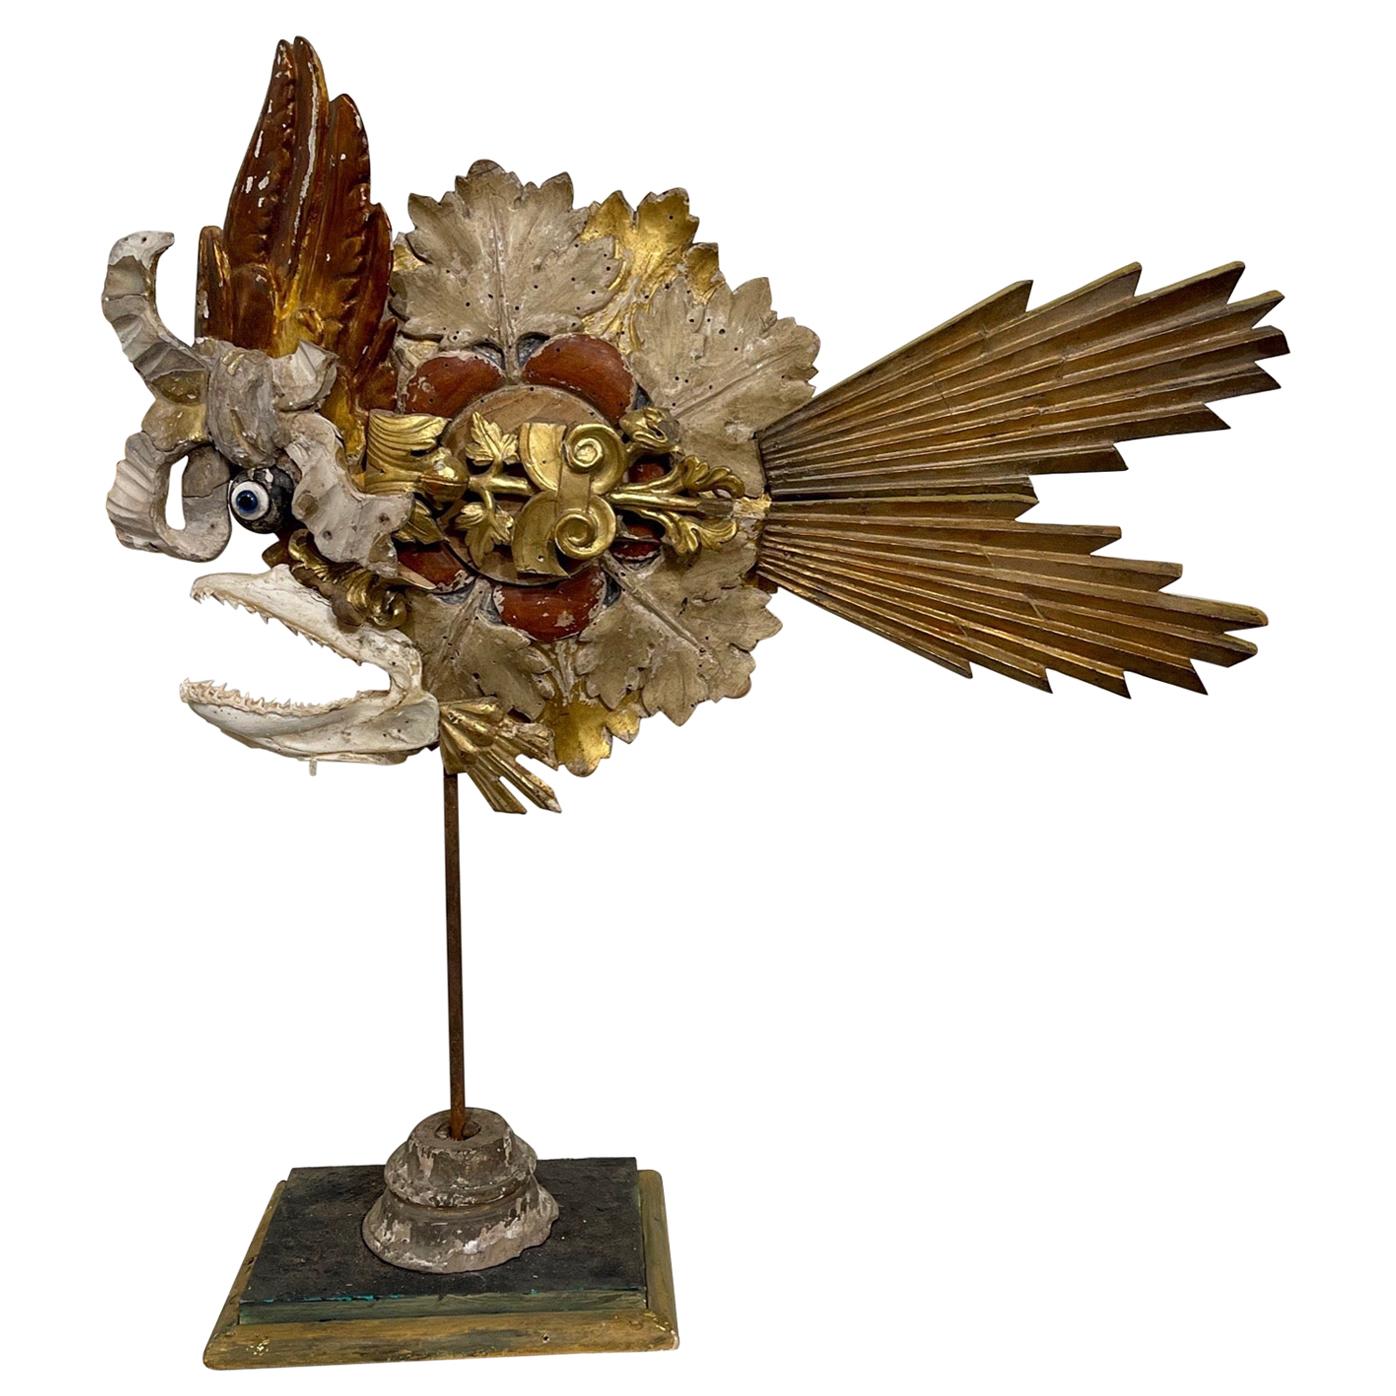 Fish Sculpture from Italy Made of Fragments from the 18th and 19th Century